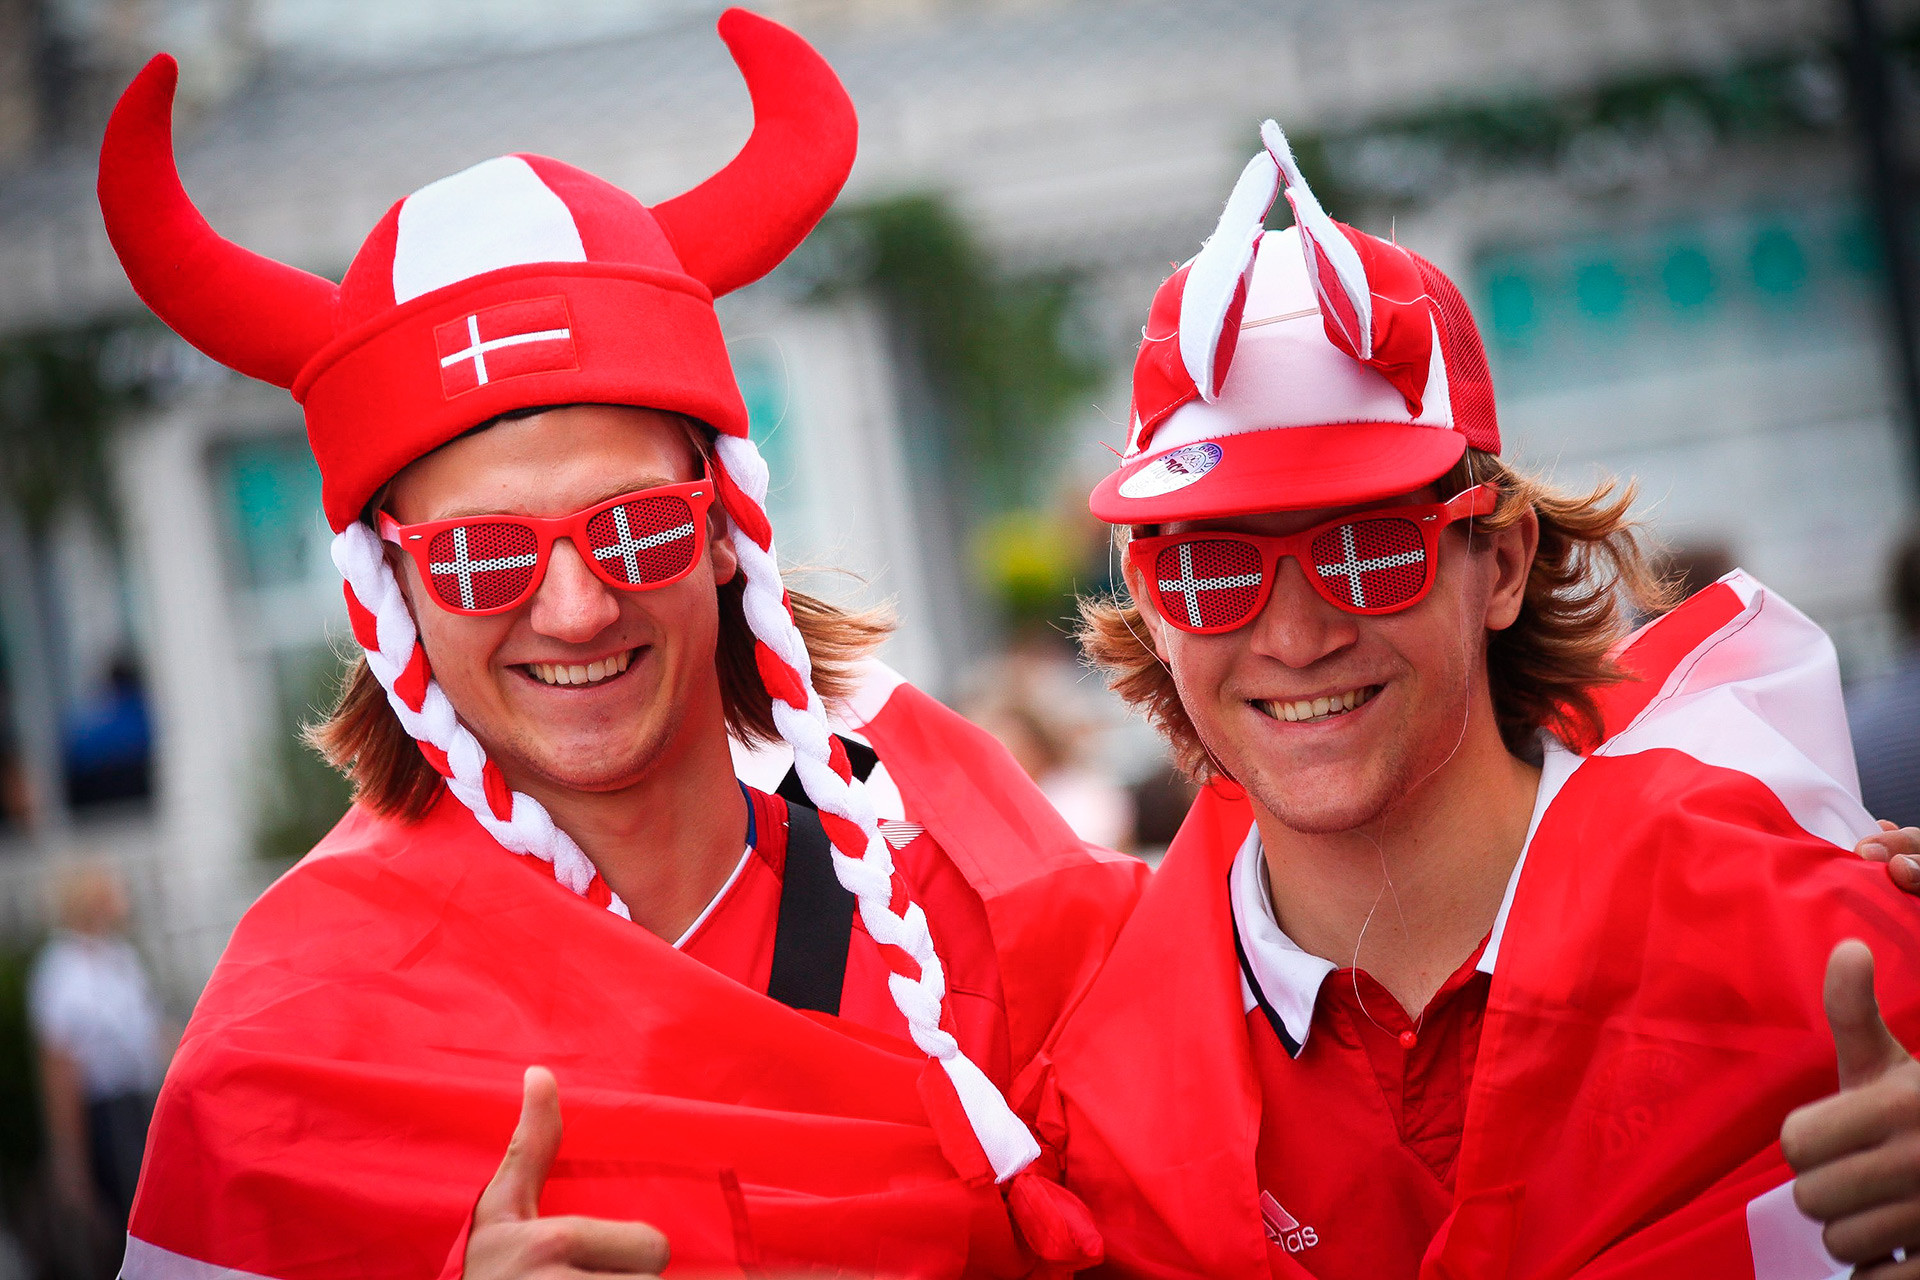 These Denmark fans are checking out Moscow before heading off to Saransk, where their team will face Peru in two days’ time. The Danes will be relying on the talents of Tottenham midfield ace Christian Eriksen to carry them through to the next round.